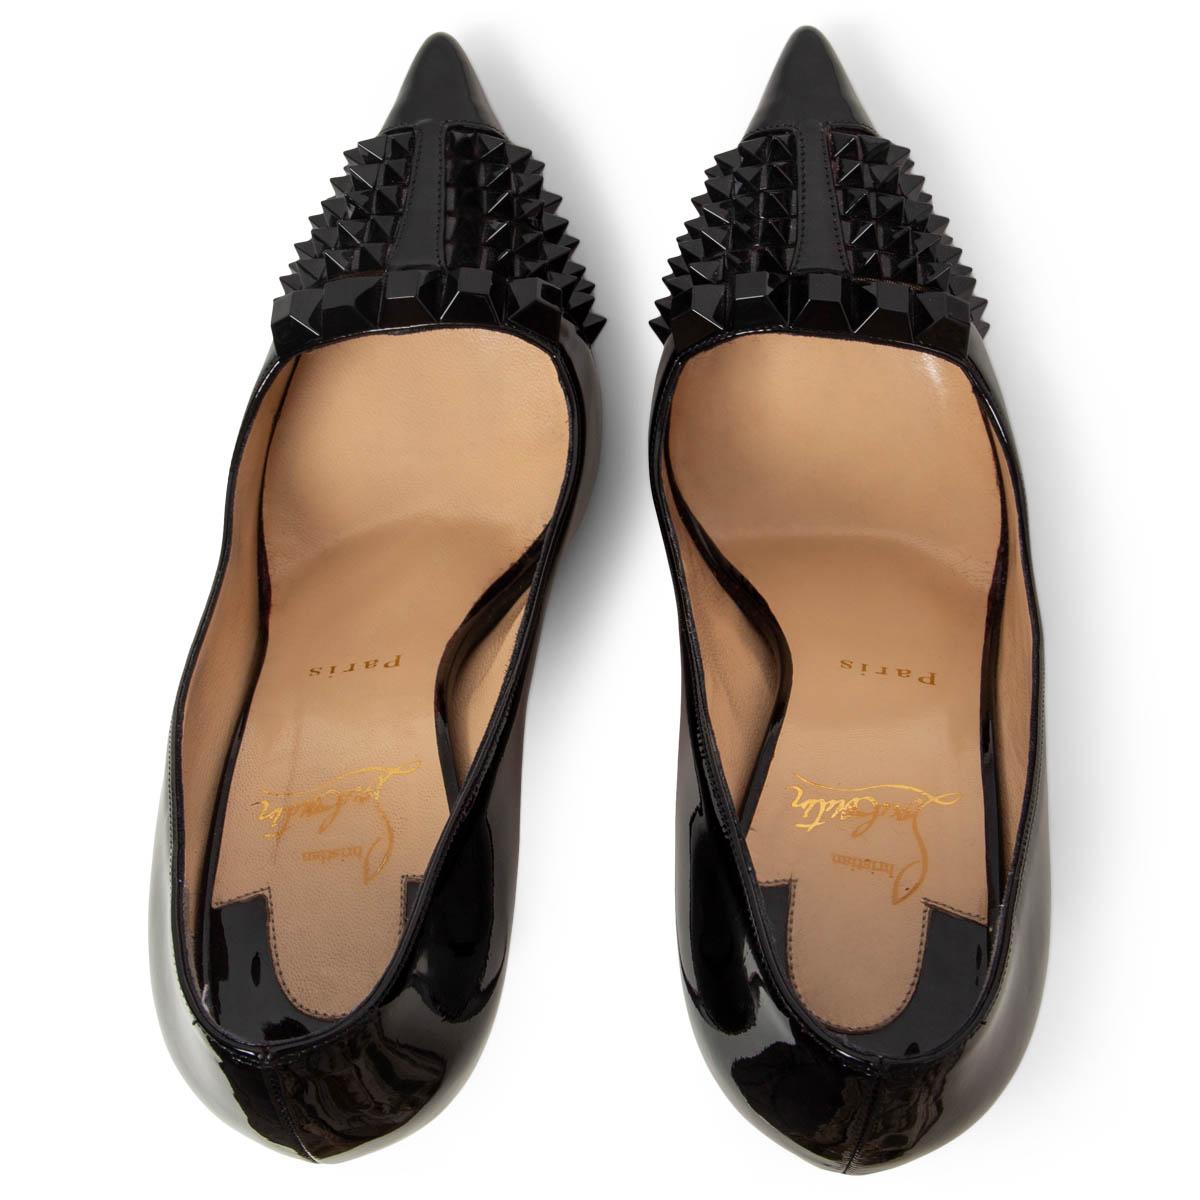 Black CHRISTIAN LOUBOUTIN black patent leather PYRAMID STUDDED Pumps Shoes 37.5